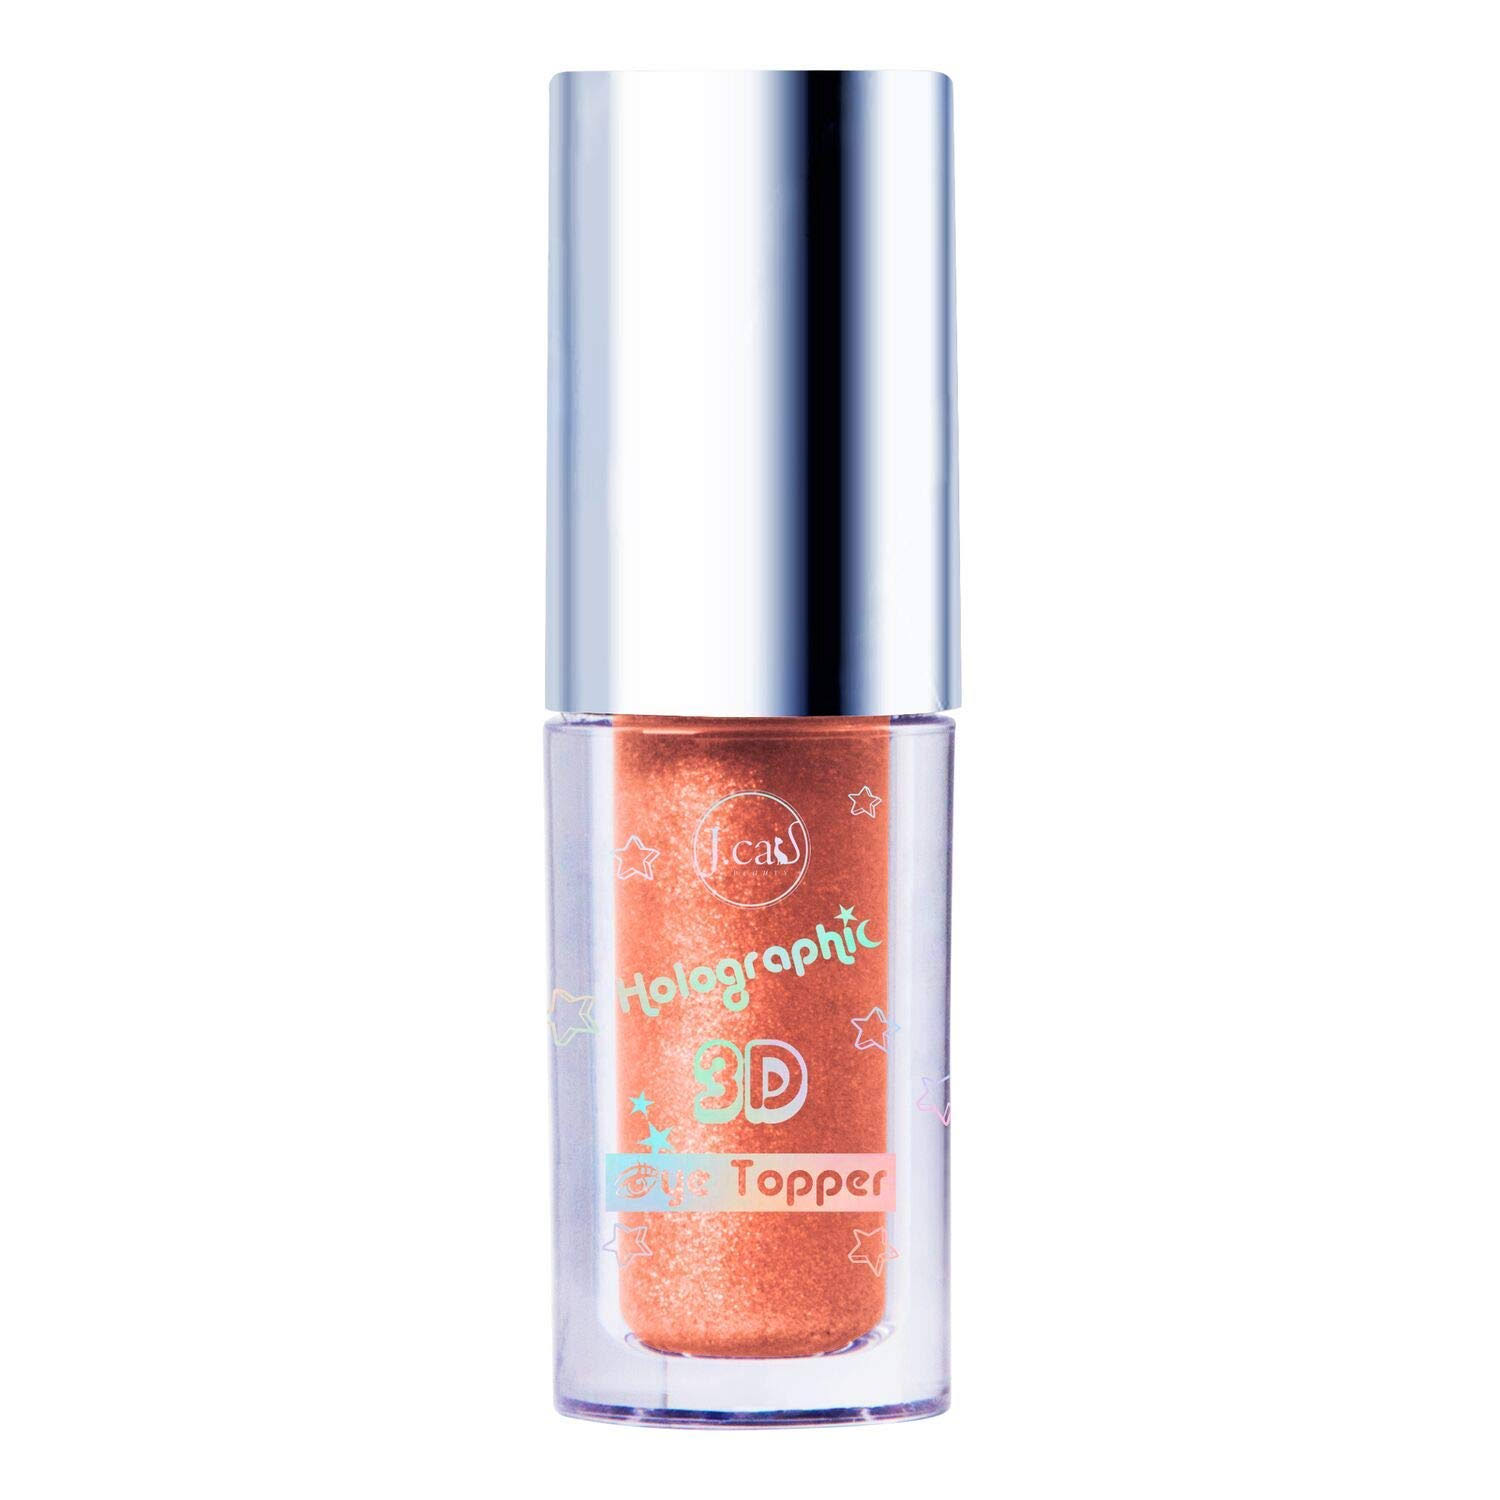 J. Cat Beauty Holographic 3D Eye Topper Pinch Me Peachy